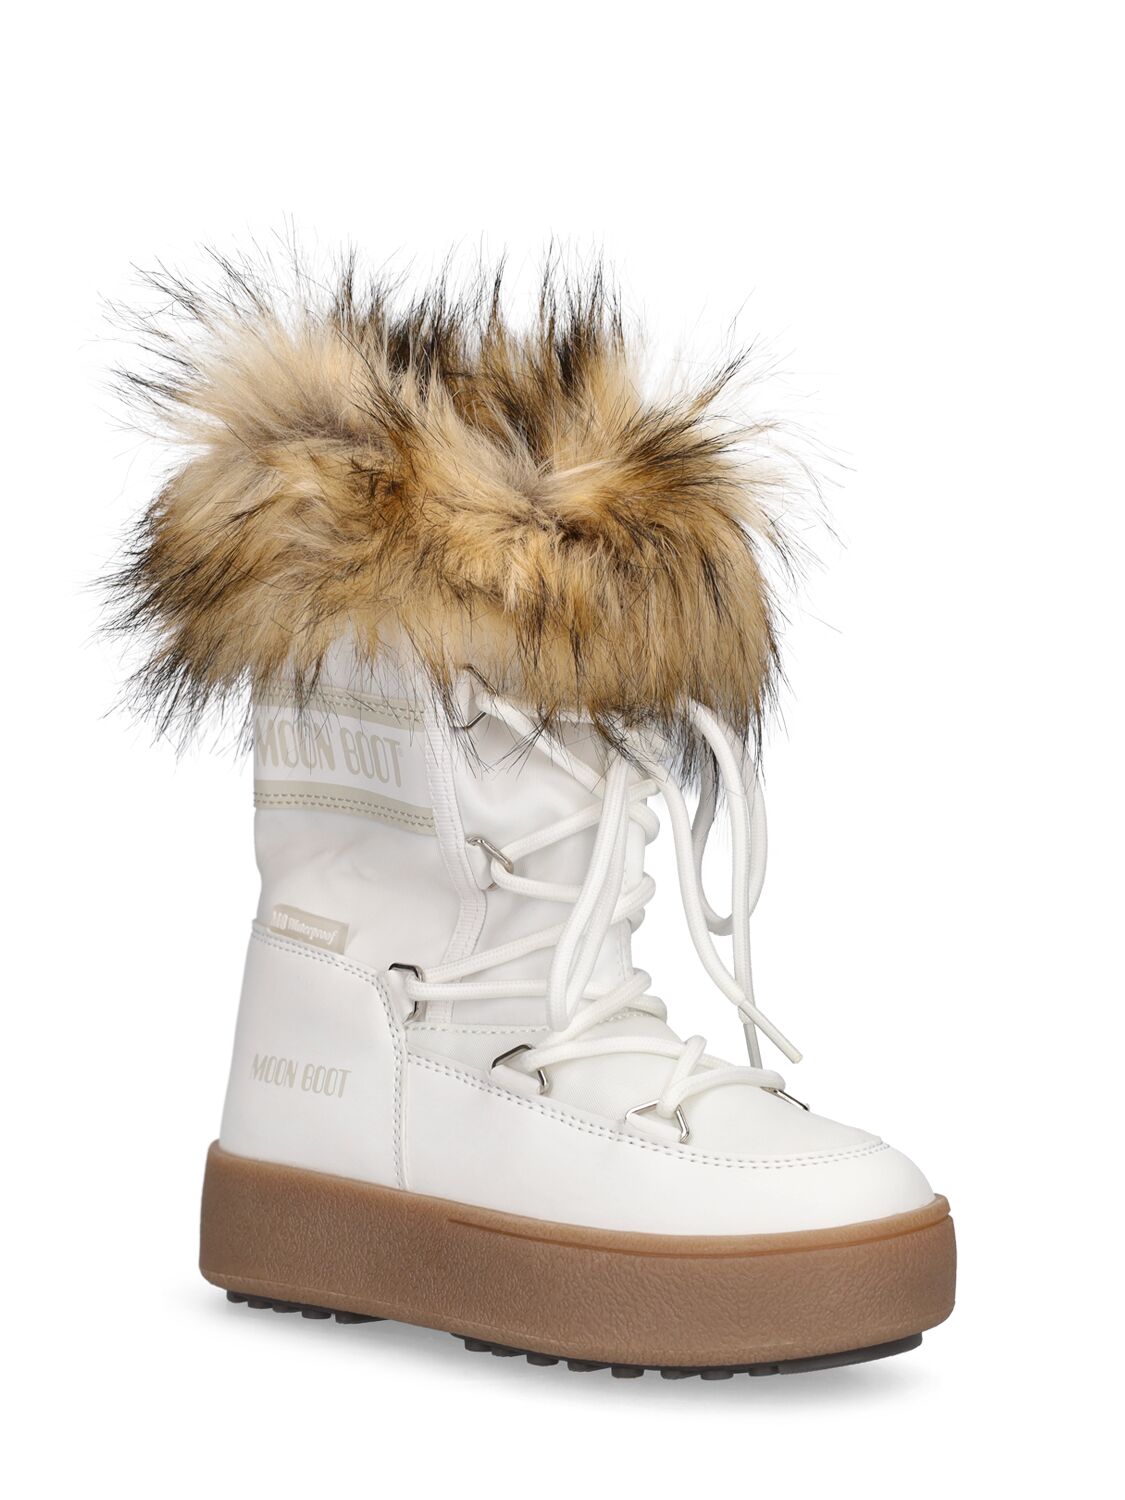 Shop Moon Boot Nylon Ankle Snow Boots W/ Faux Fur In White